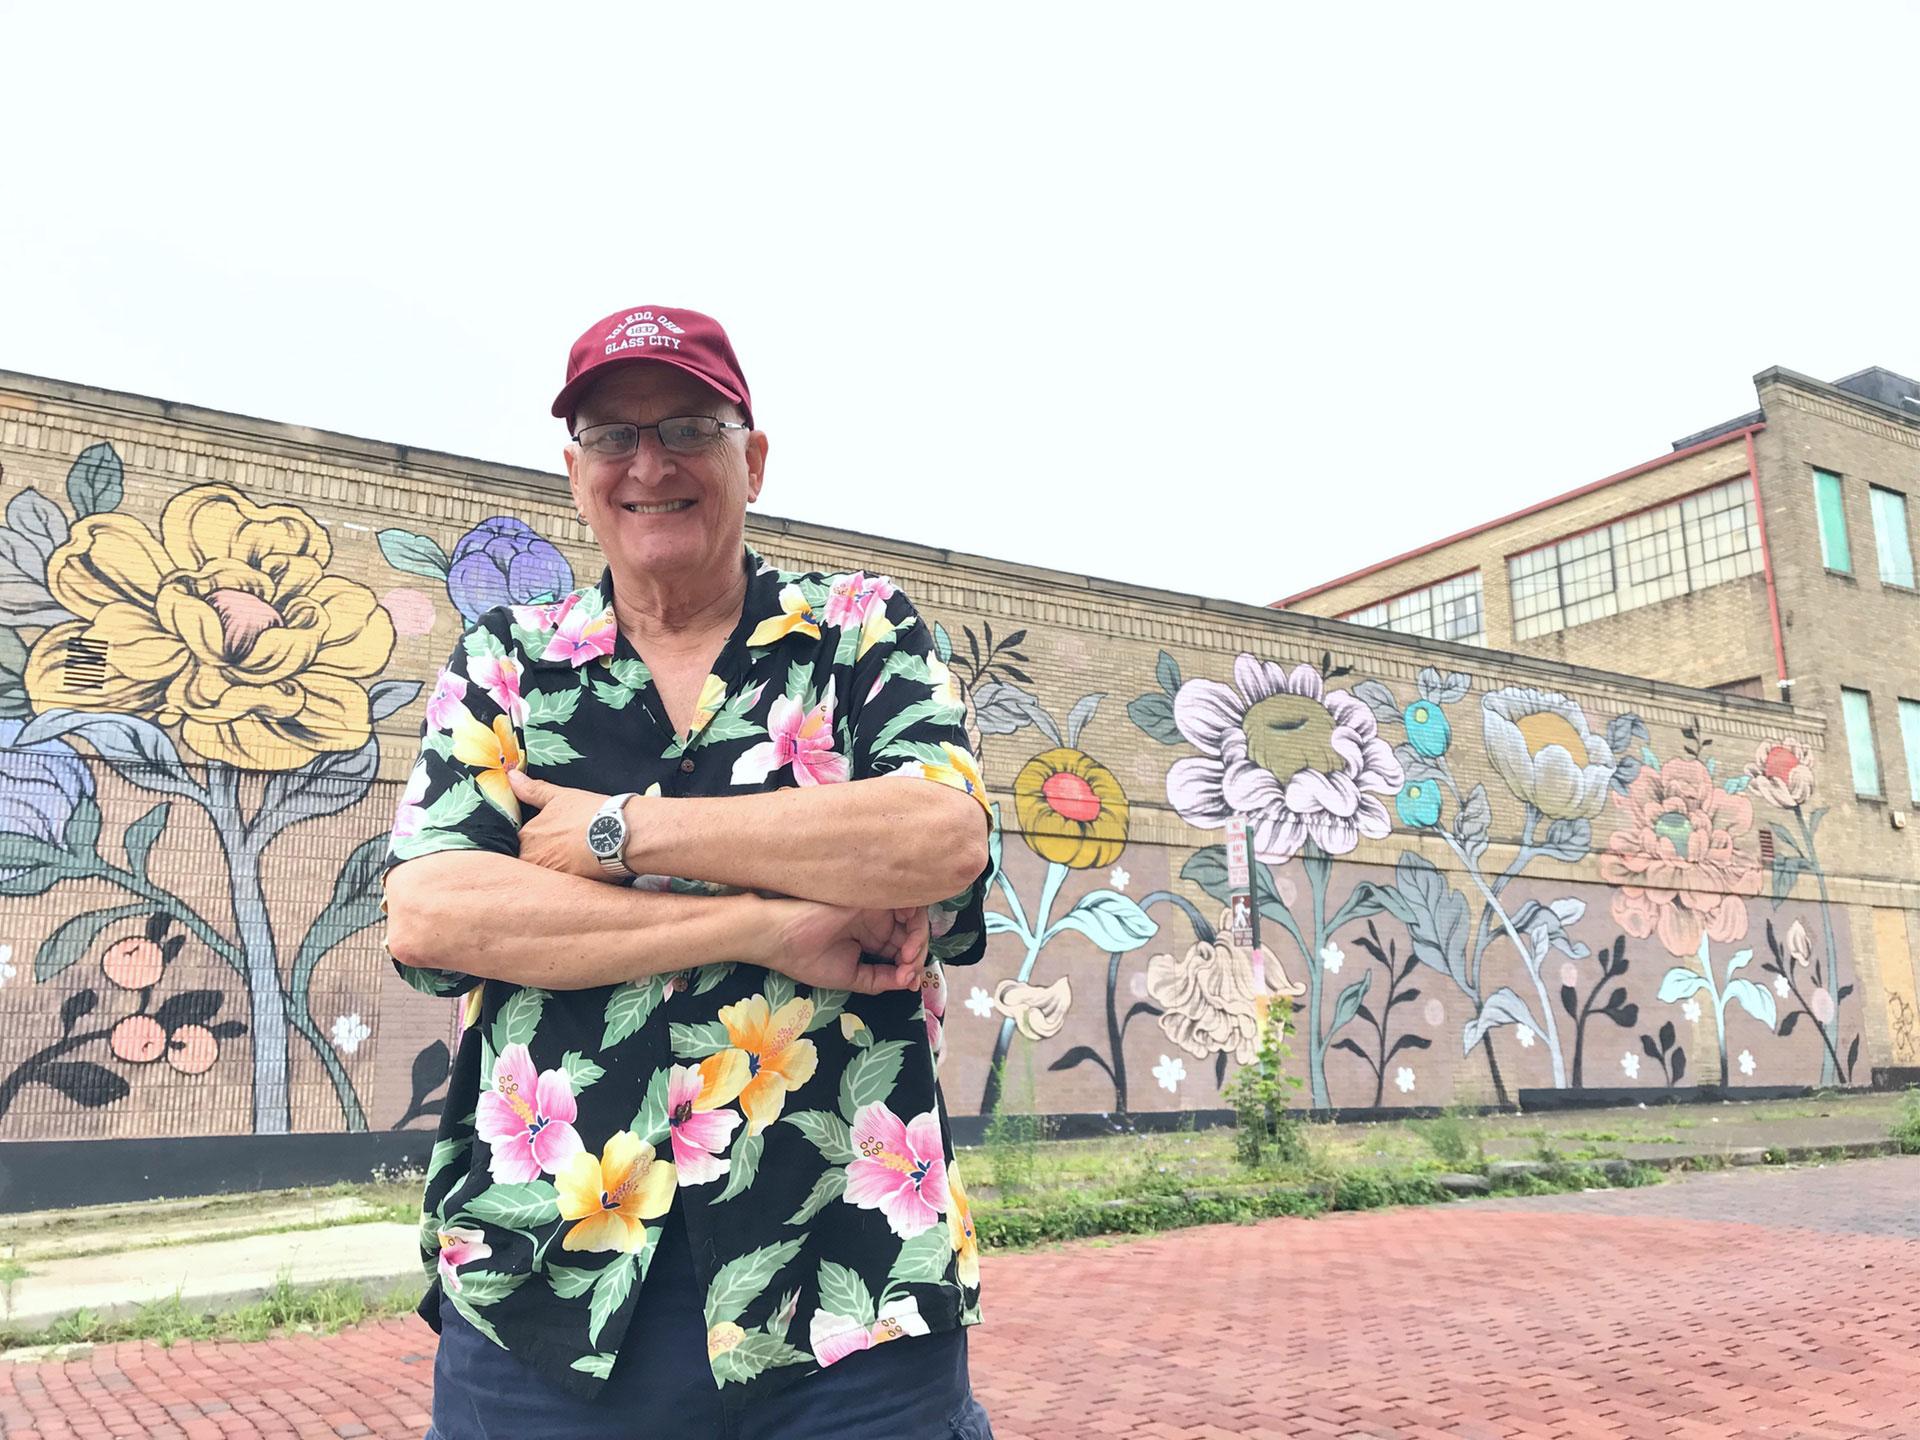 A man is shown wearing a flower-print shirt and red hat while standing in front of a wall with flowers painted on it.